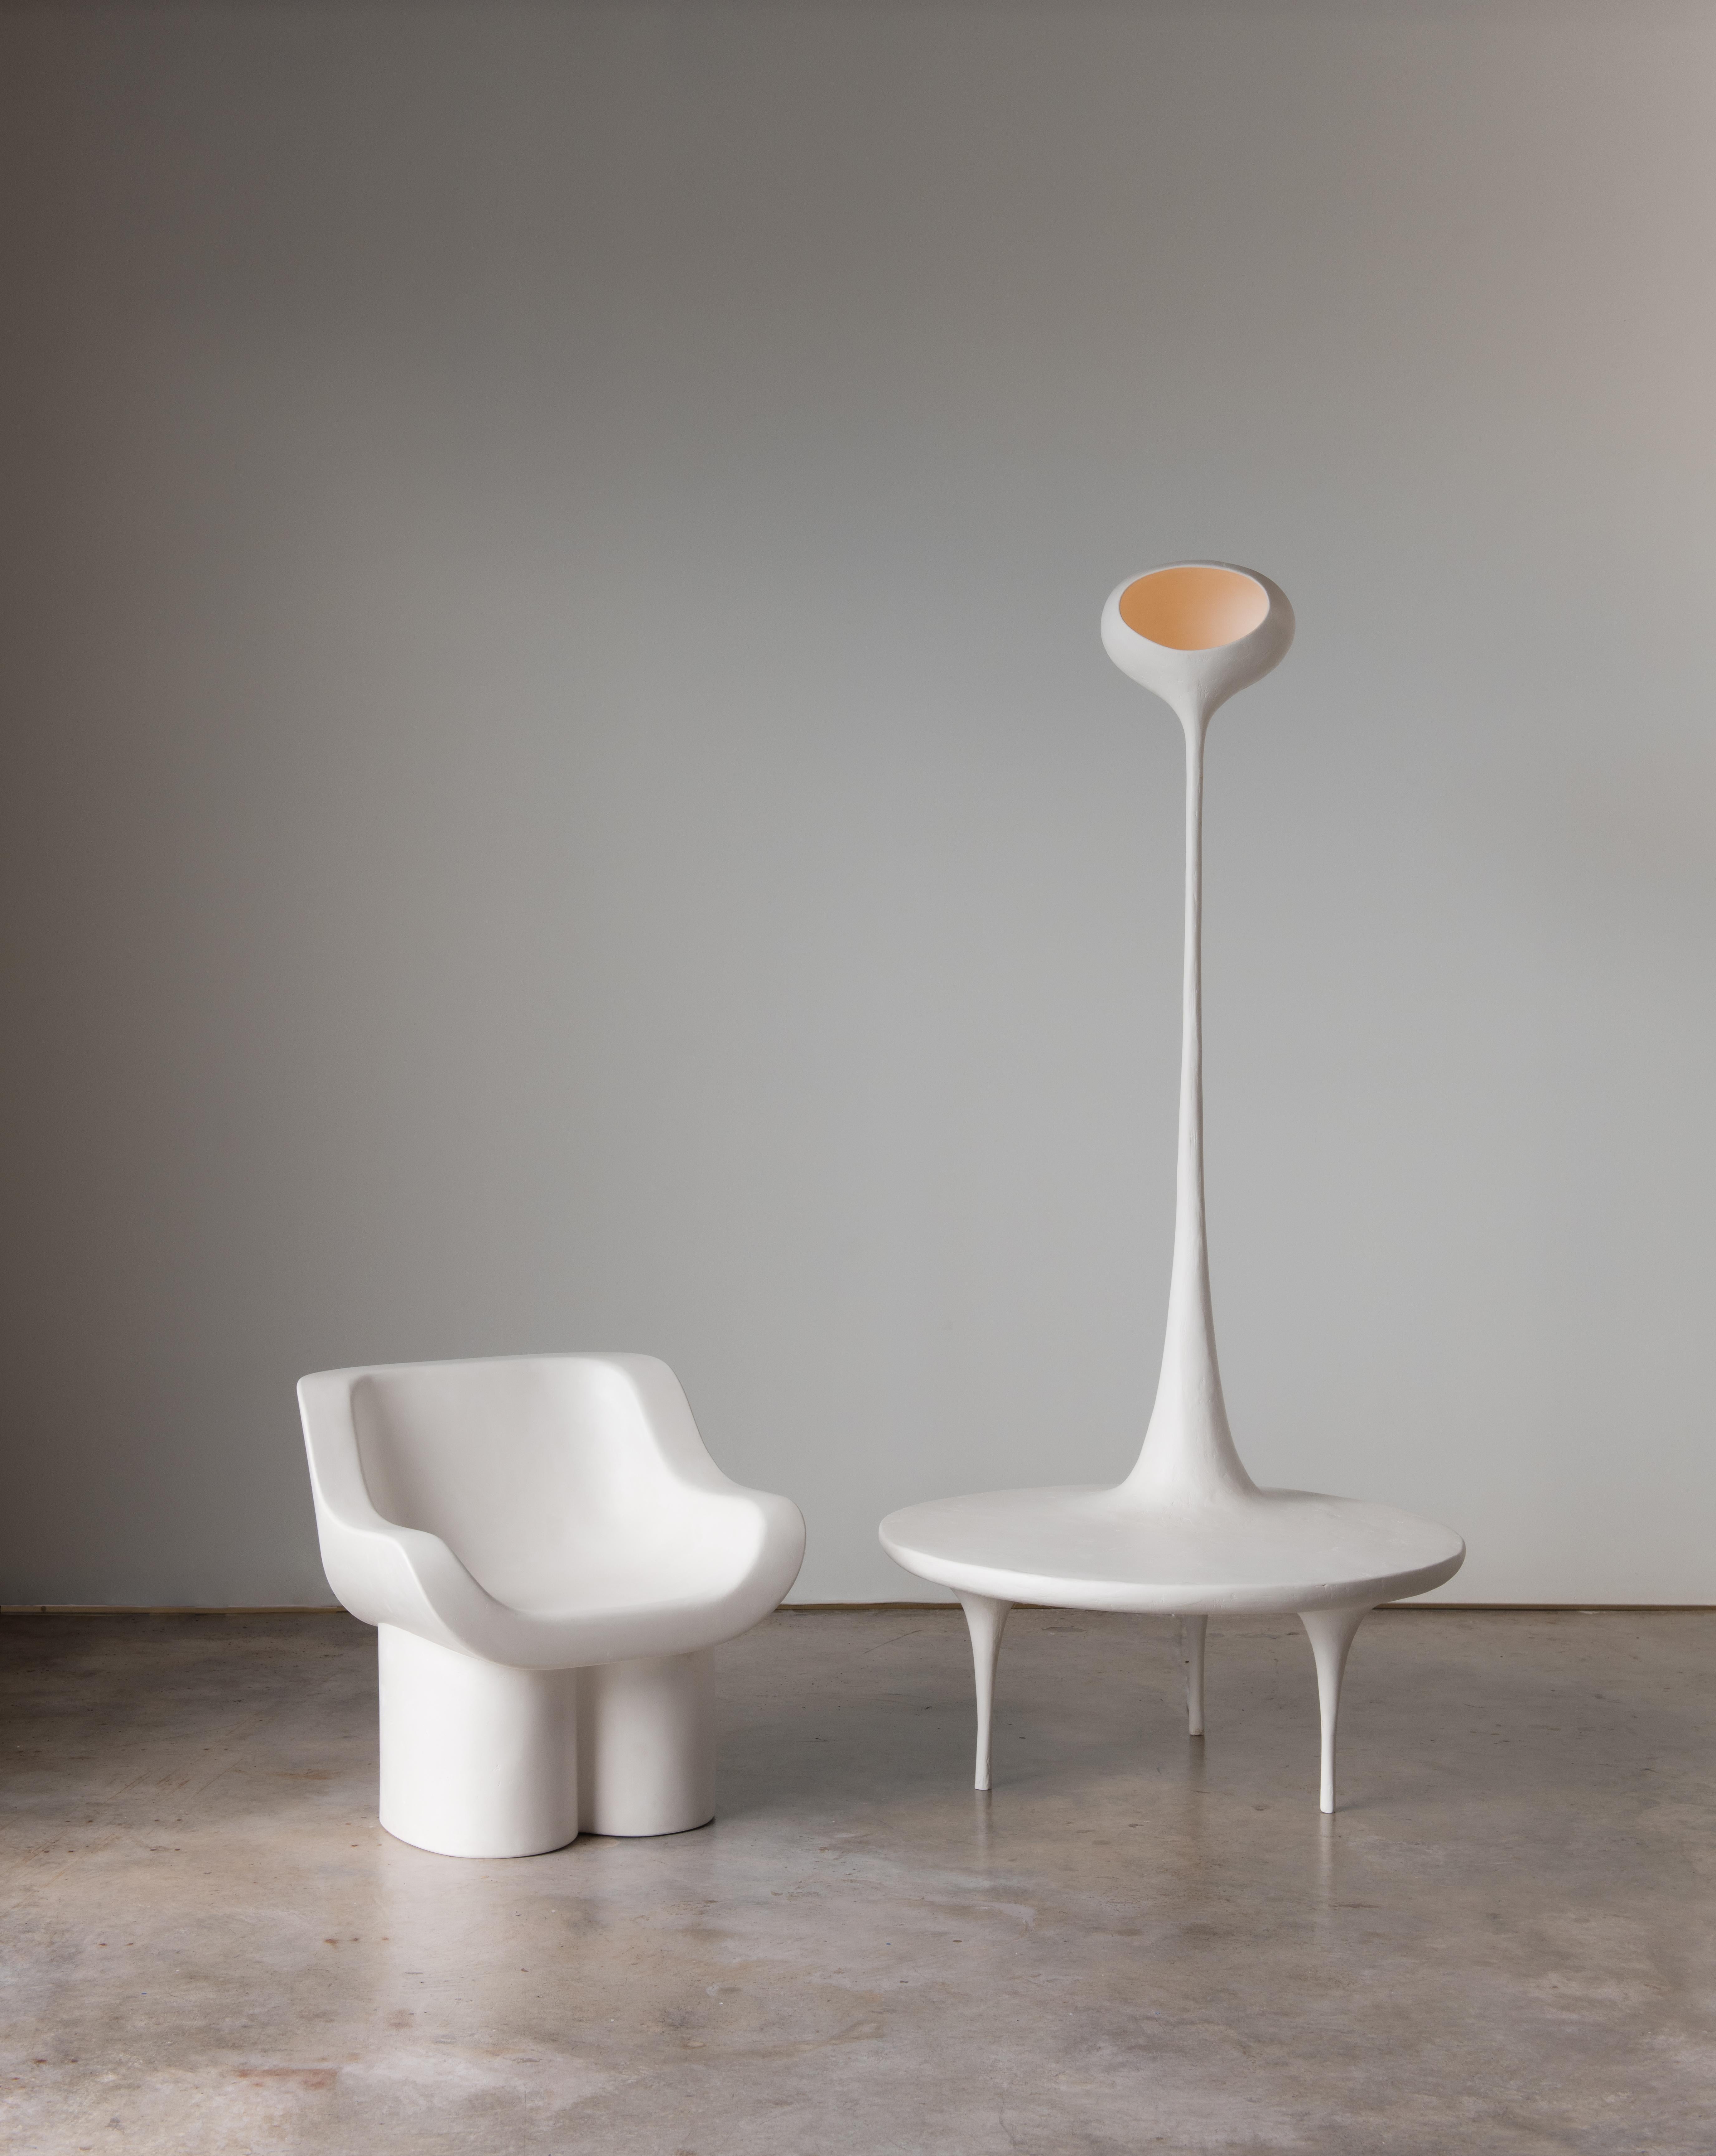 American Table That Dreamed 'of Being Light' in Polished Plaster by Reynold Rodriguez